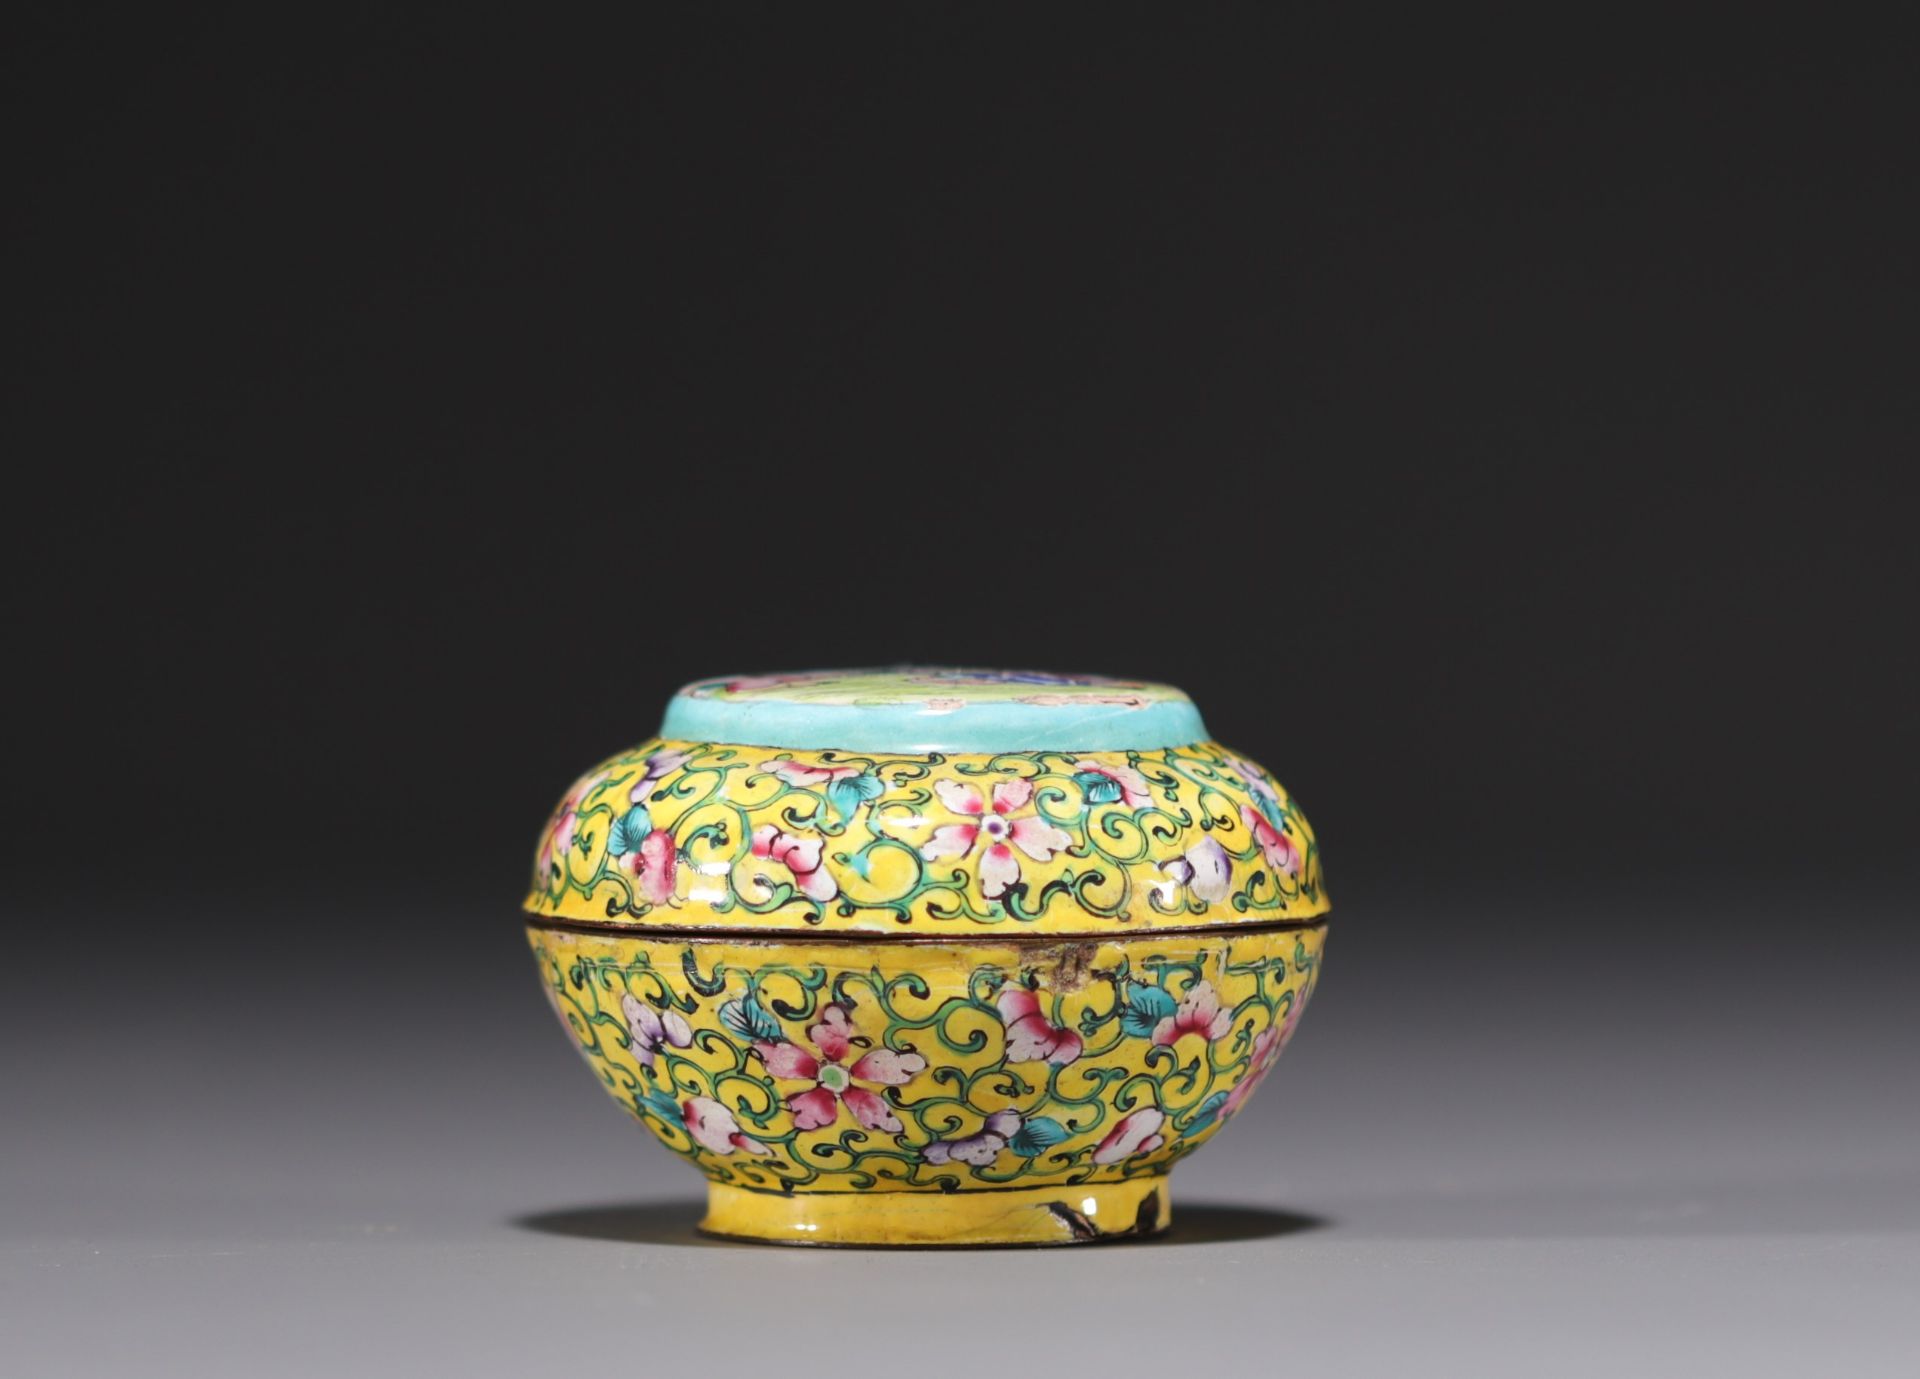 China - Cloisonne enamel box with figures, Canton, 18th-19th century. - Image 3 of 3